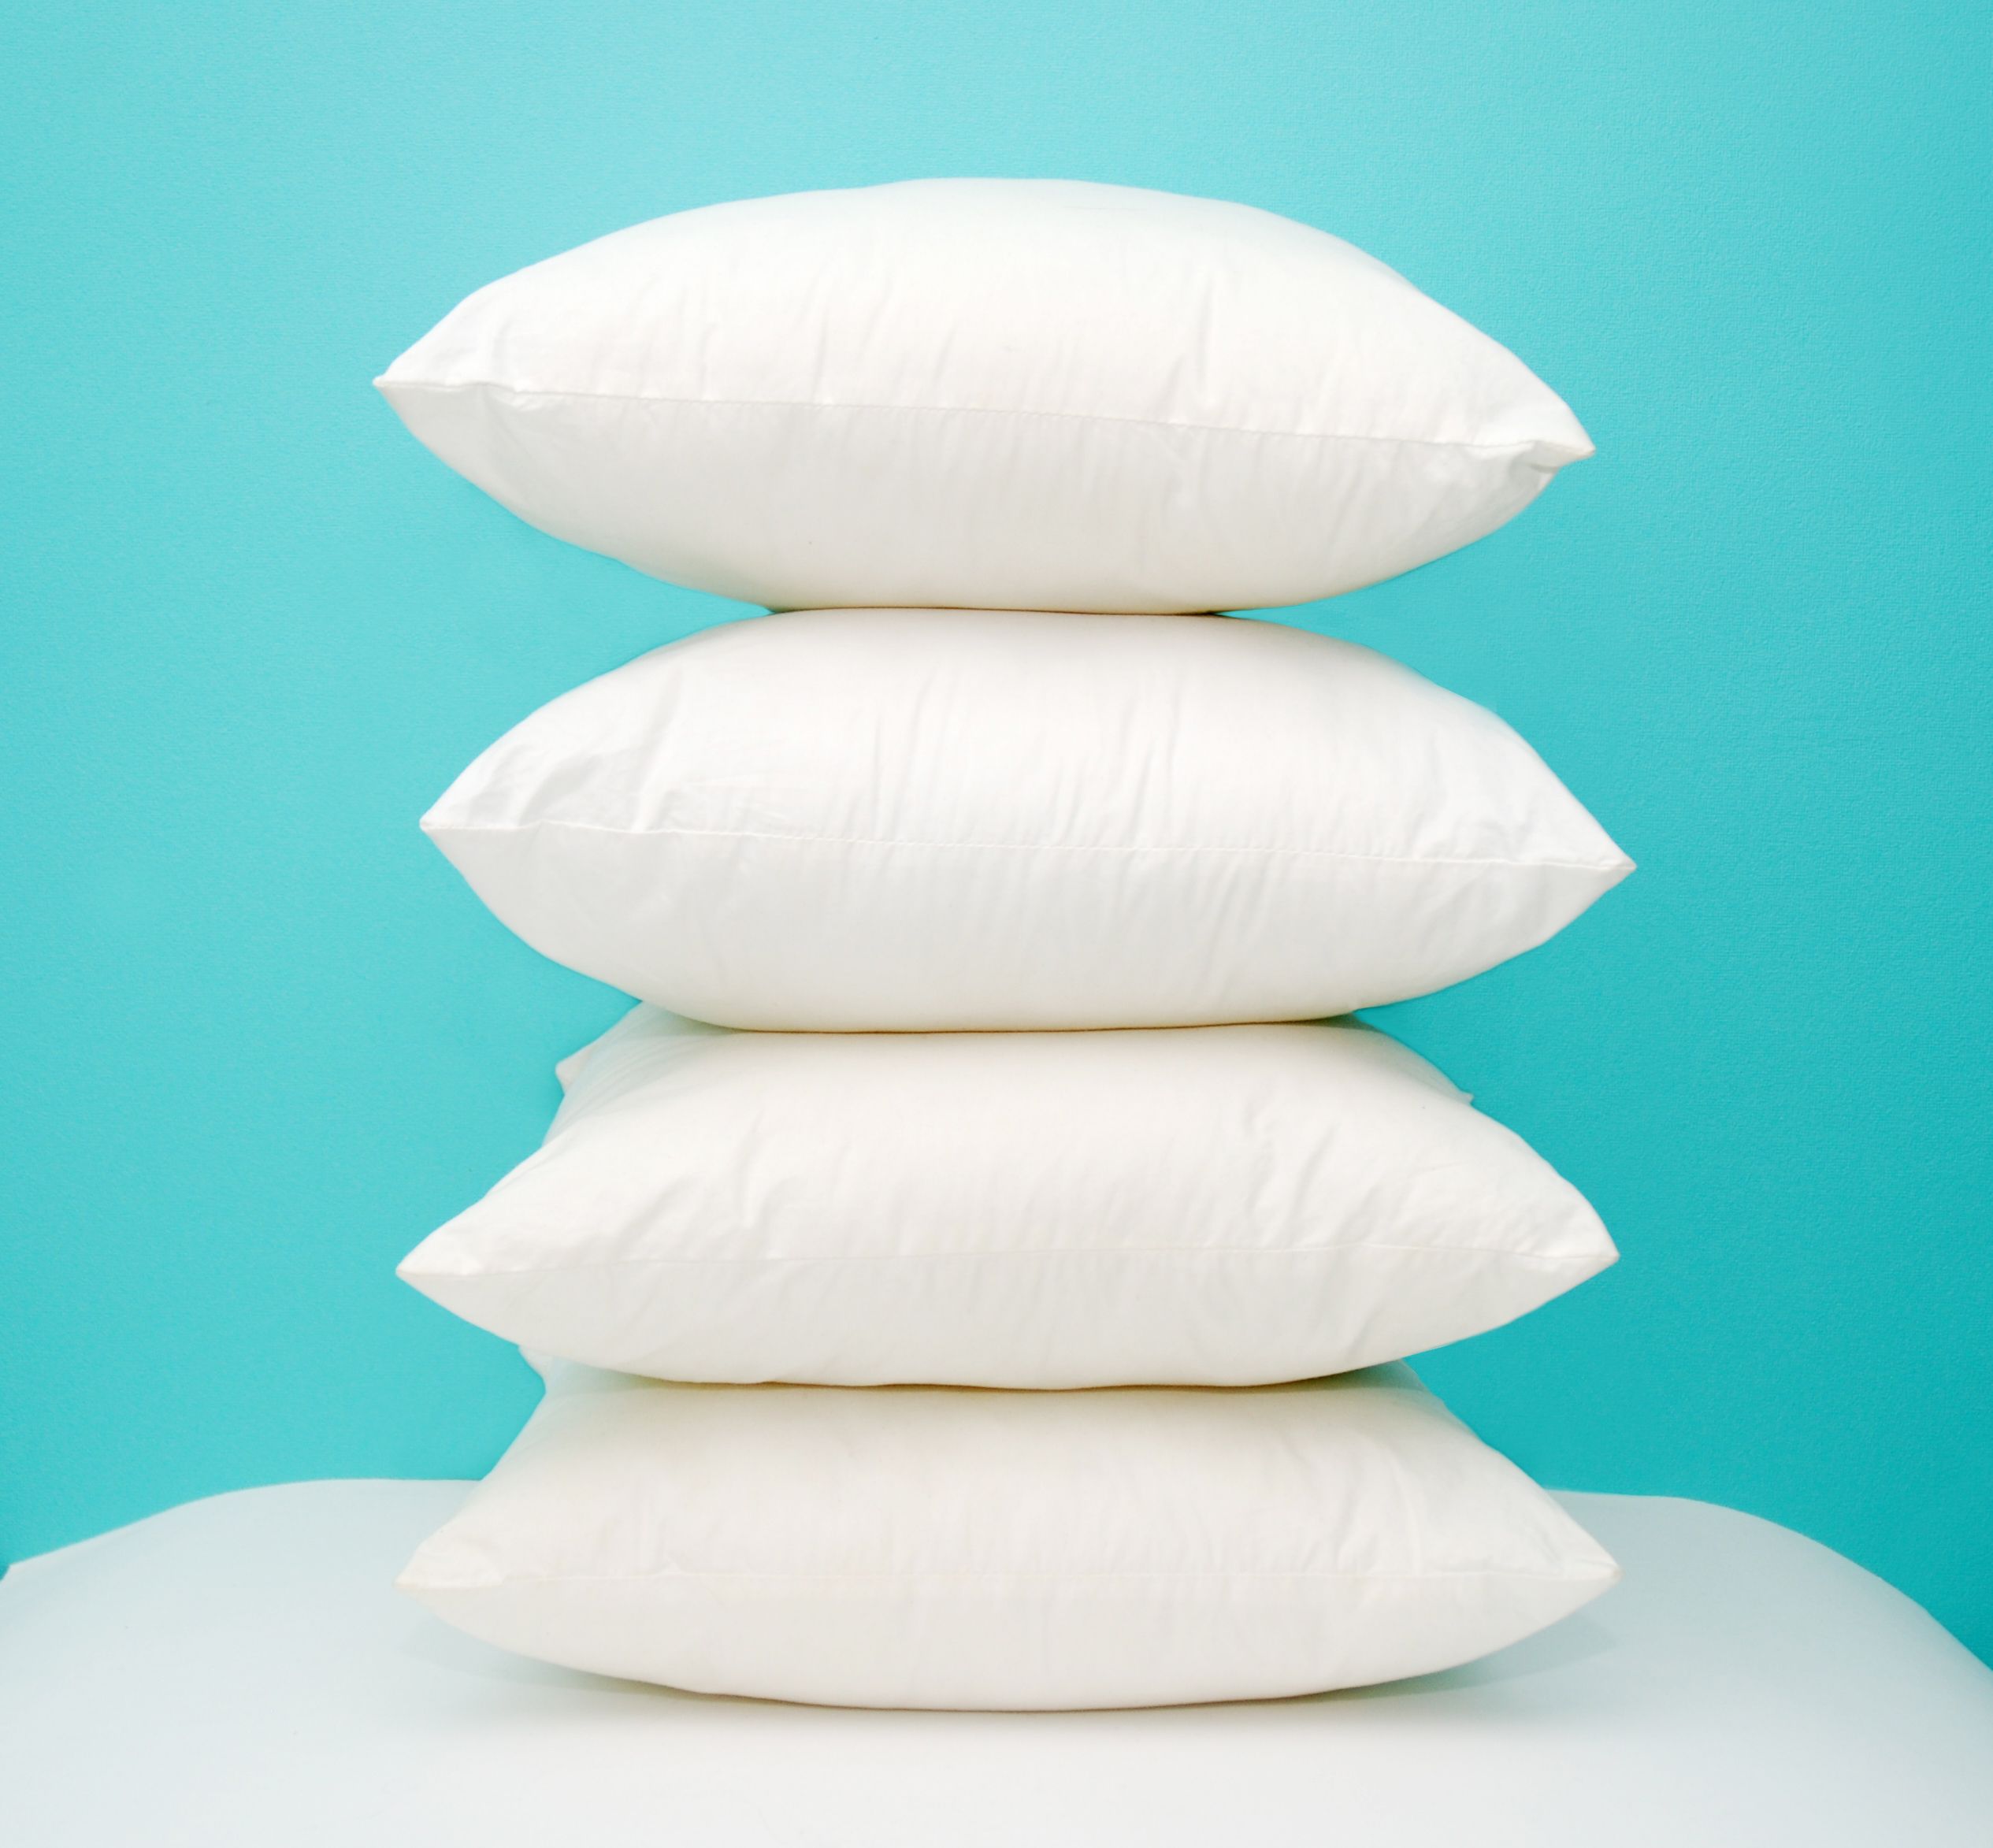 great pillows to buy